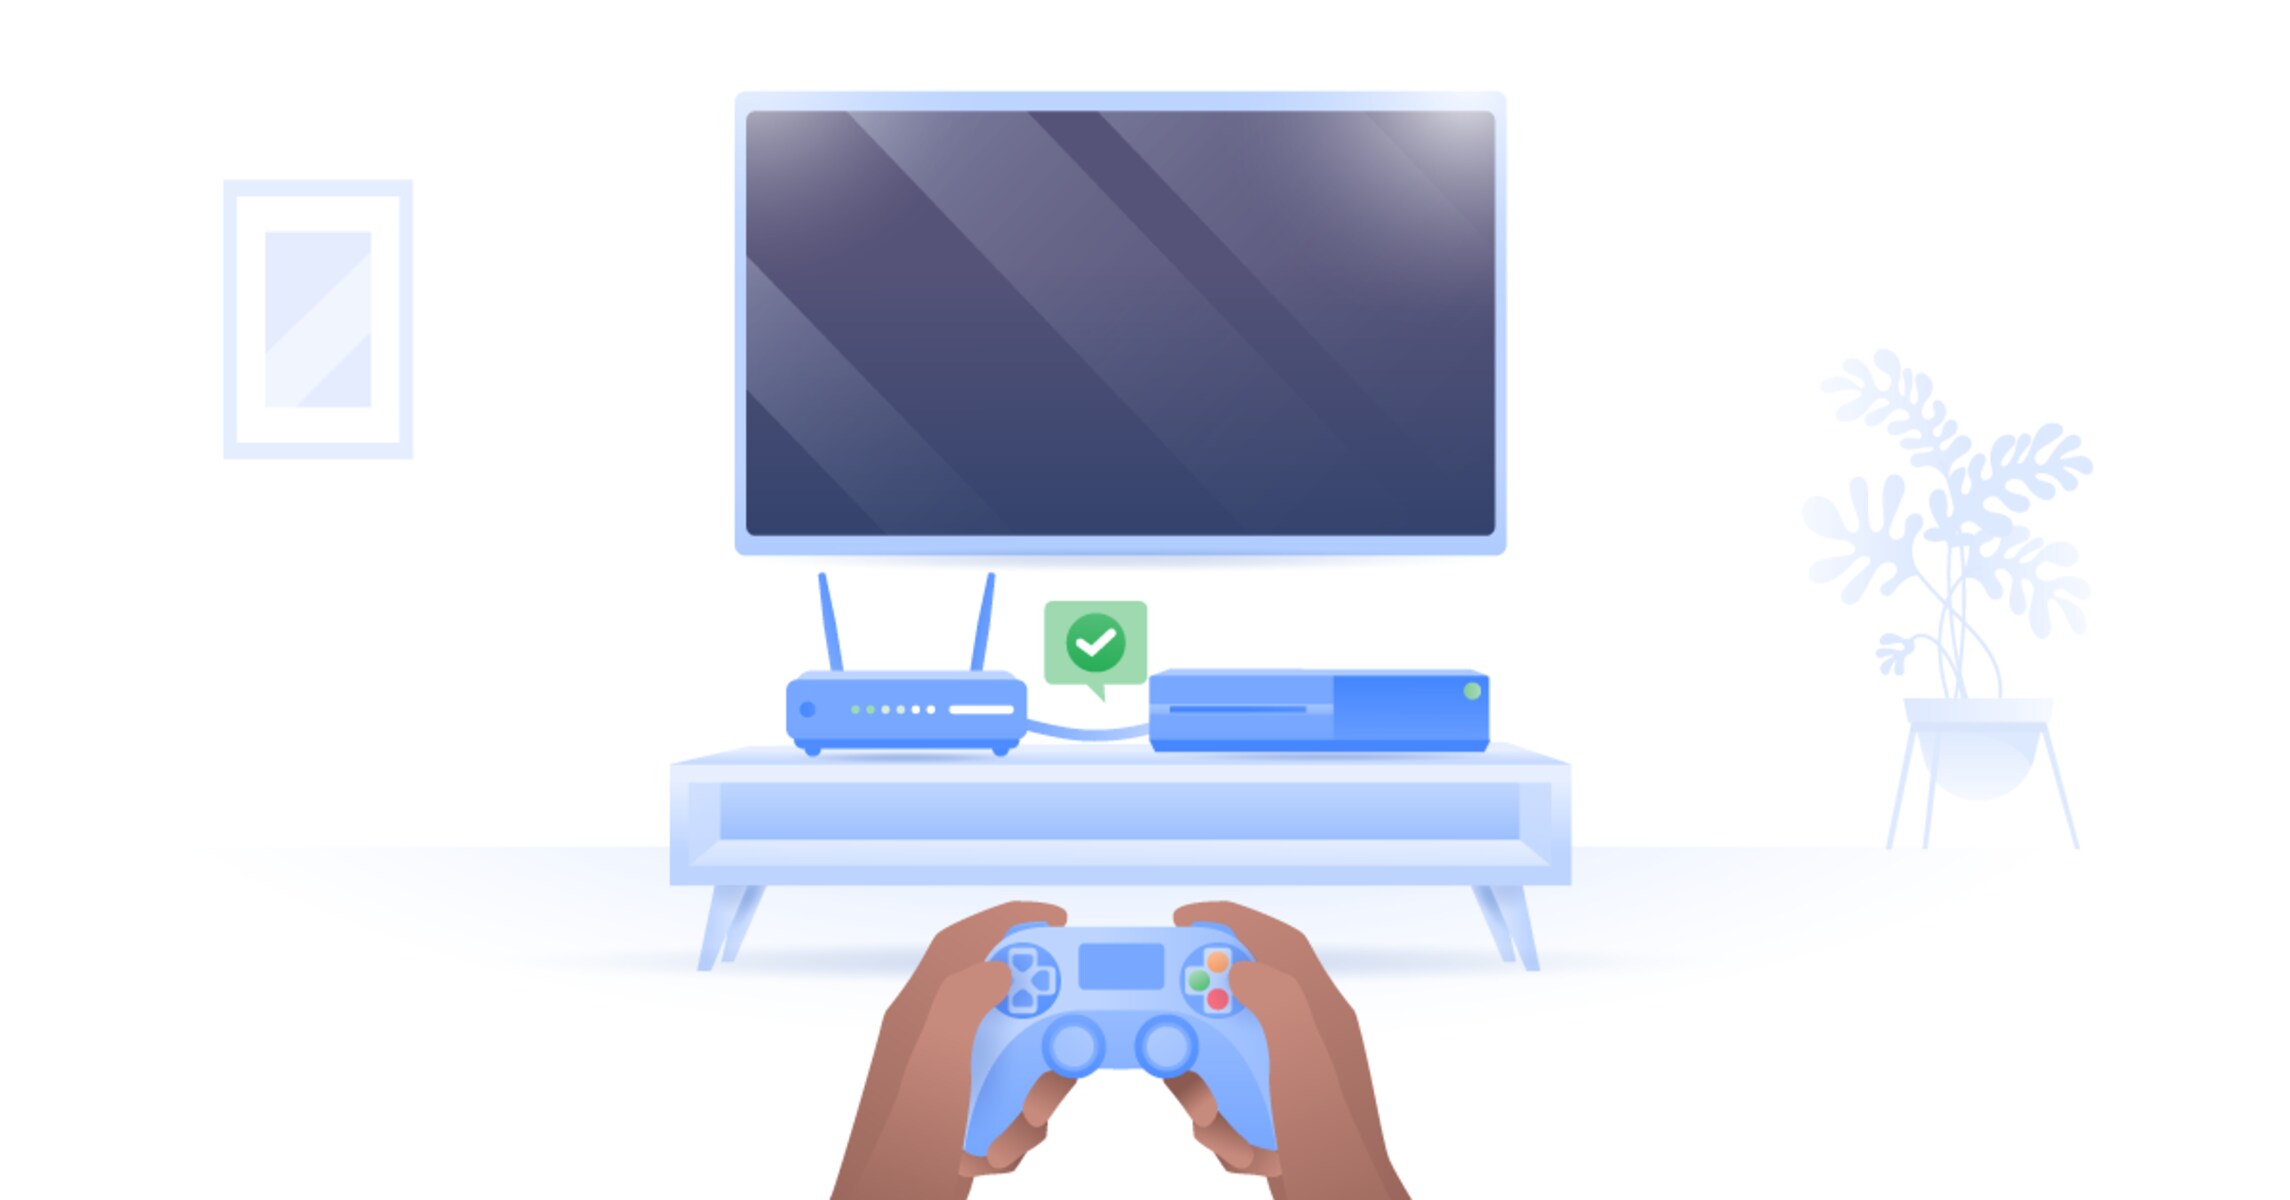 How To Set Up PS4 On A Network Switch